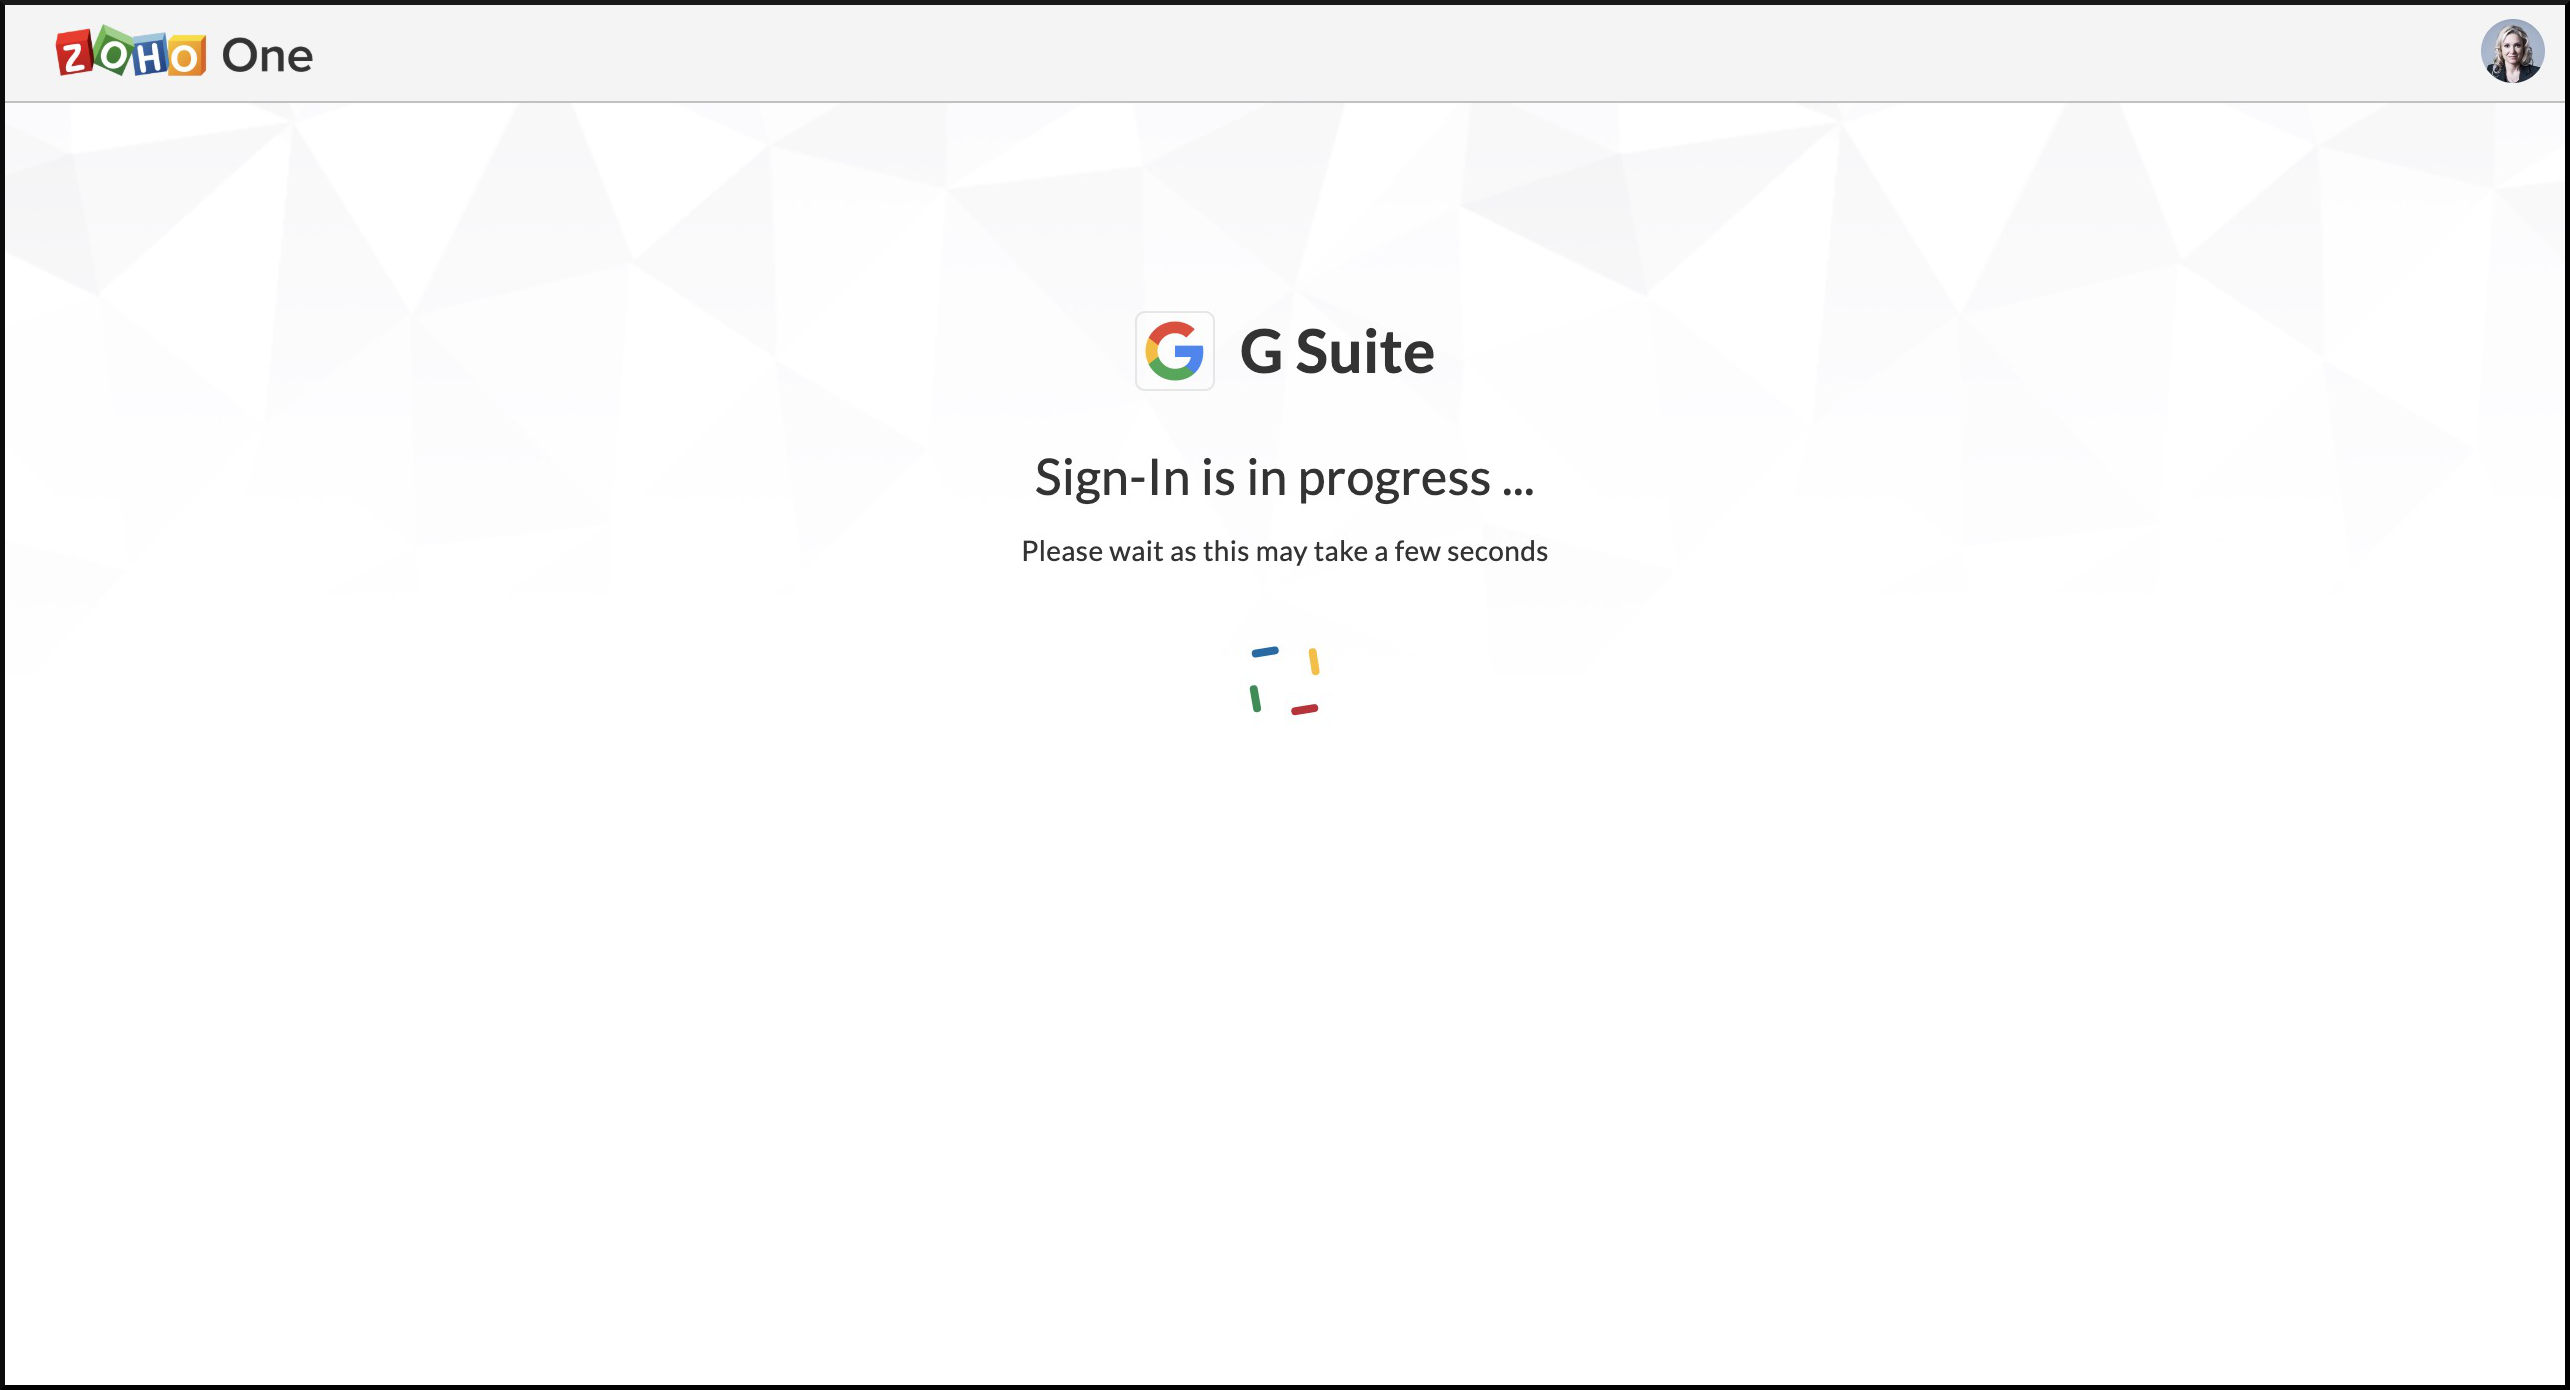 Single sign-on into G Suite through Zoho One